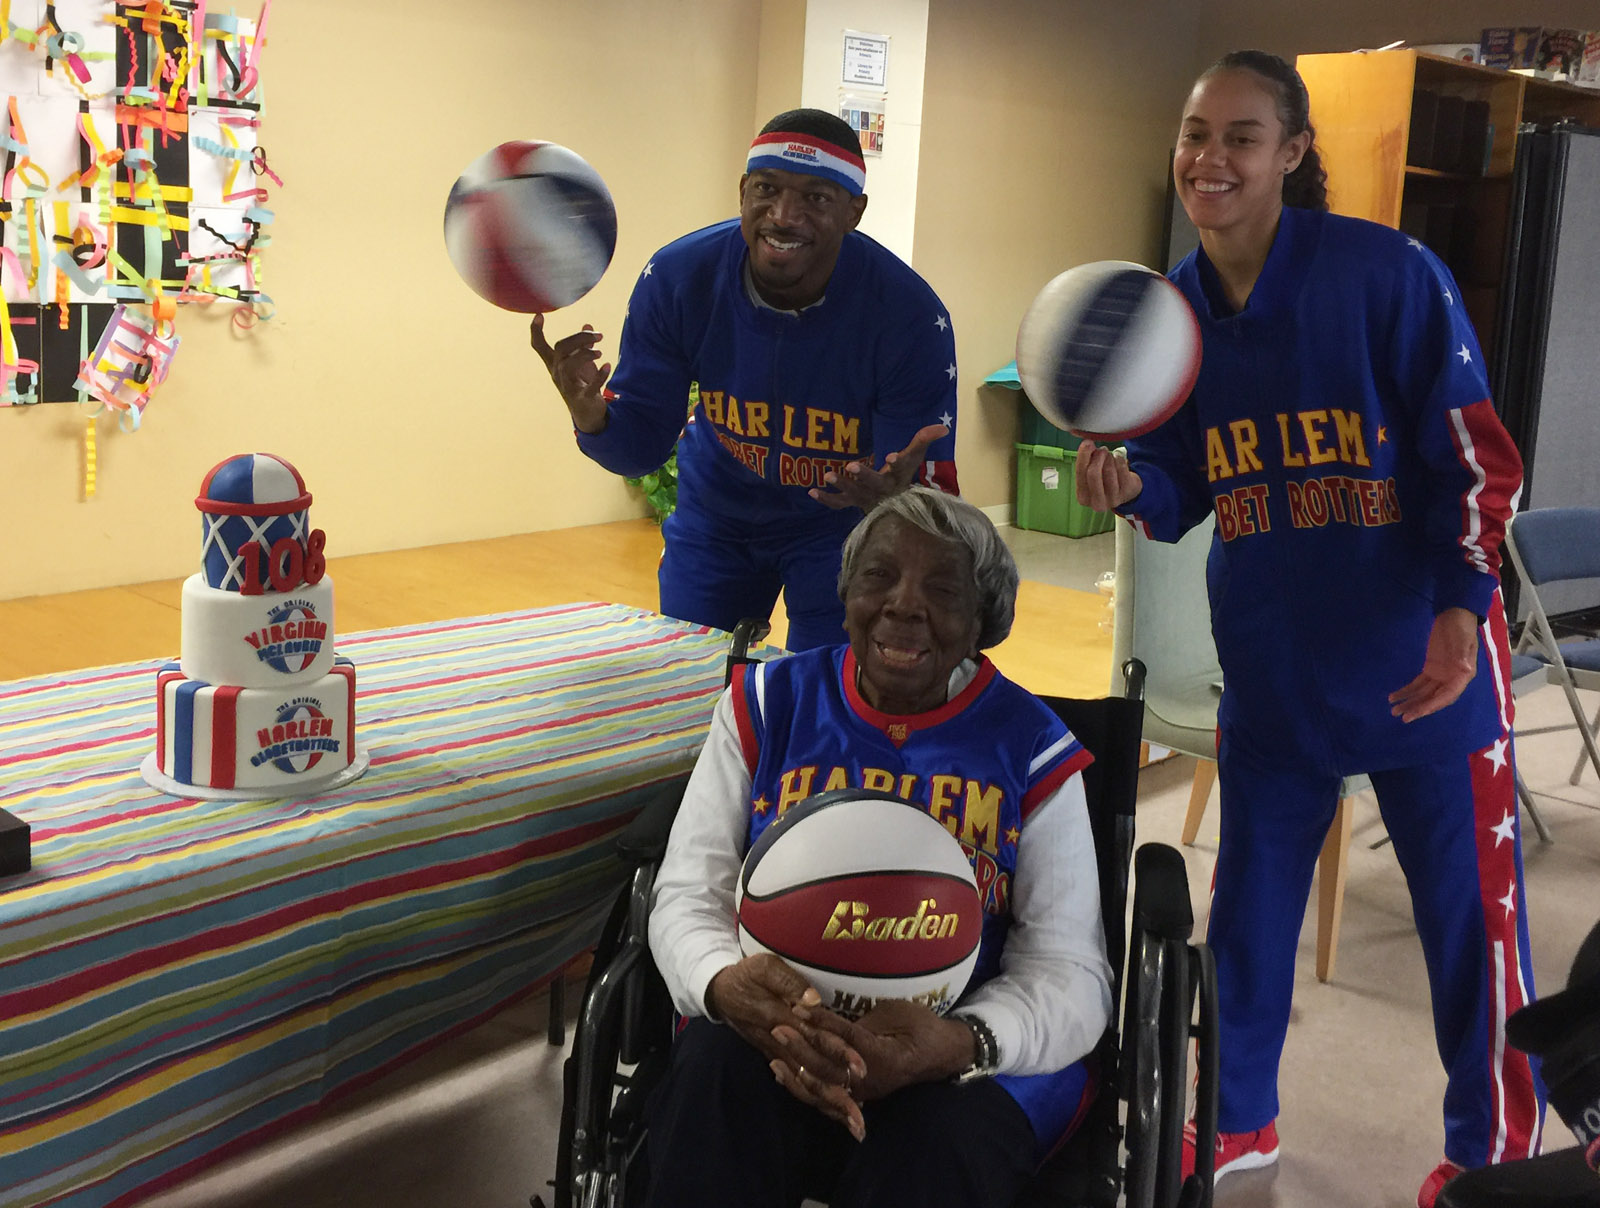 Buckets Blakes and Hoops Green, the 15thwoman to join the Globetrotters in the team's 91-year history joined with McLaurin visiting children at LAMB Public Charter School on Monday, March 13, 2017. (WTOP/Kristi King)